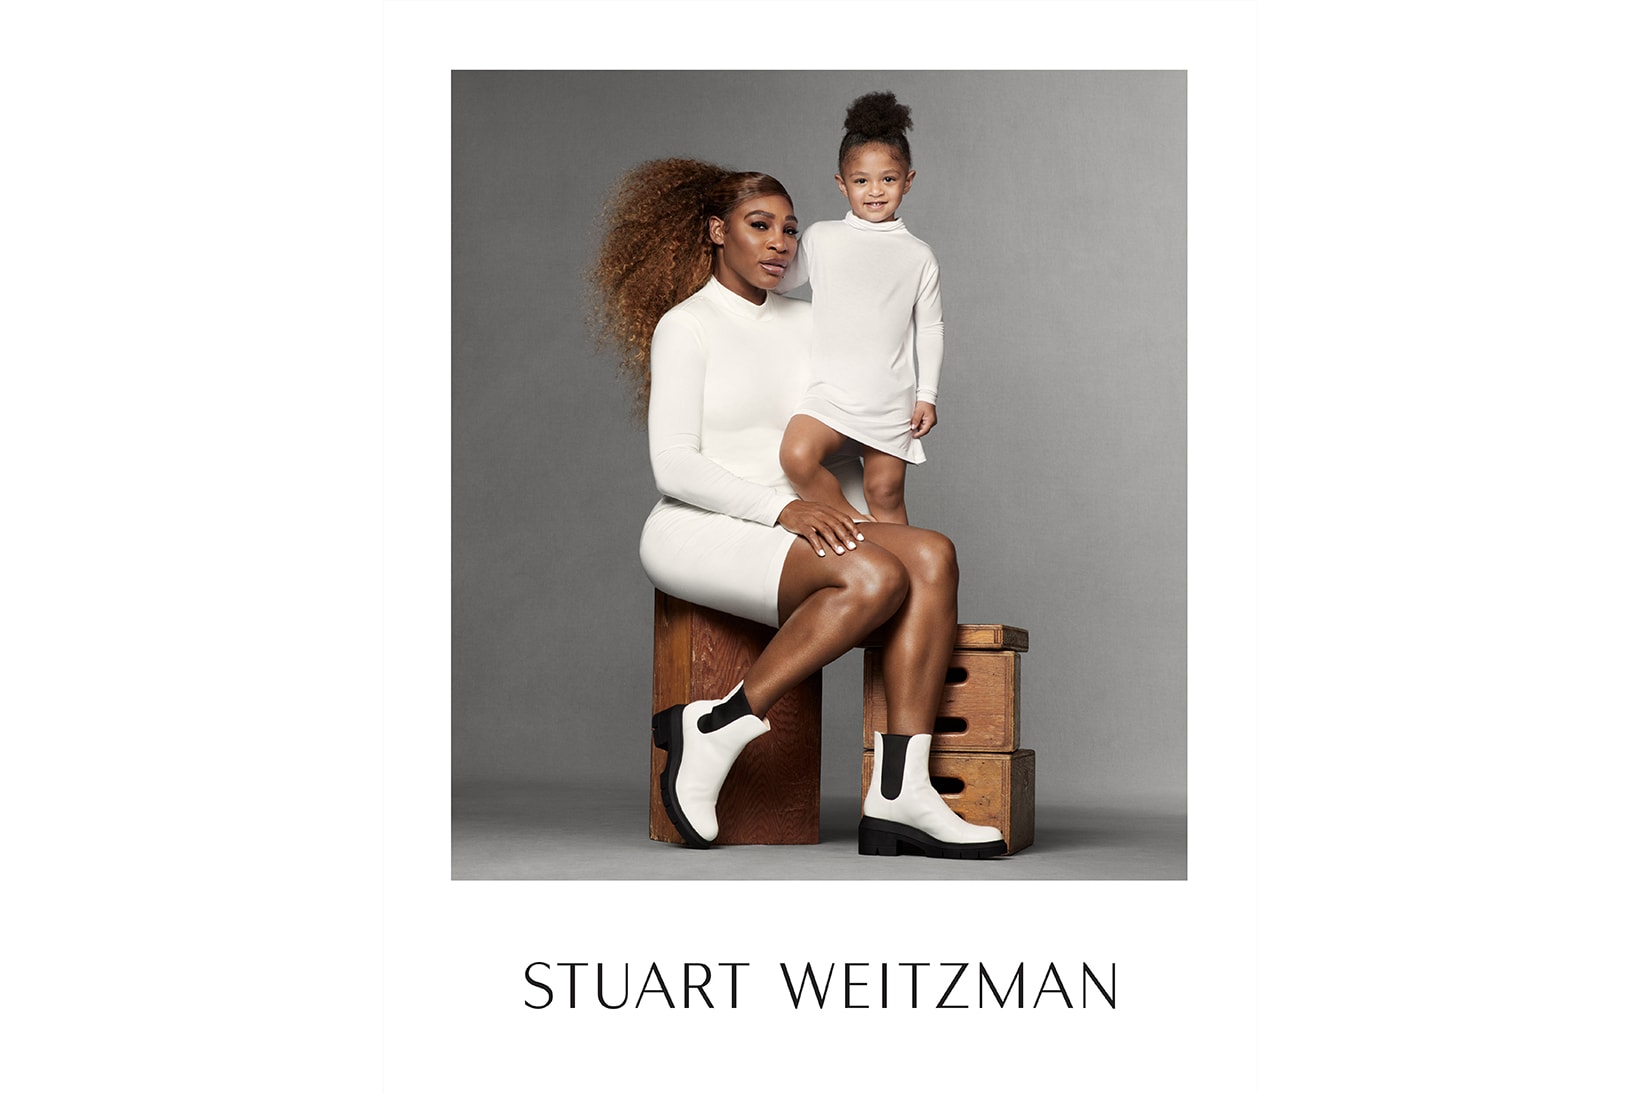 Serena Williams Daughter Alexis Olympia Ohanian Stuart Weitzman Spring/Summer 2021 Campaign